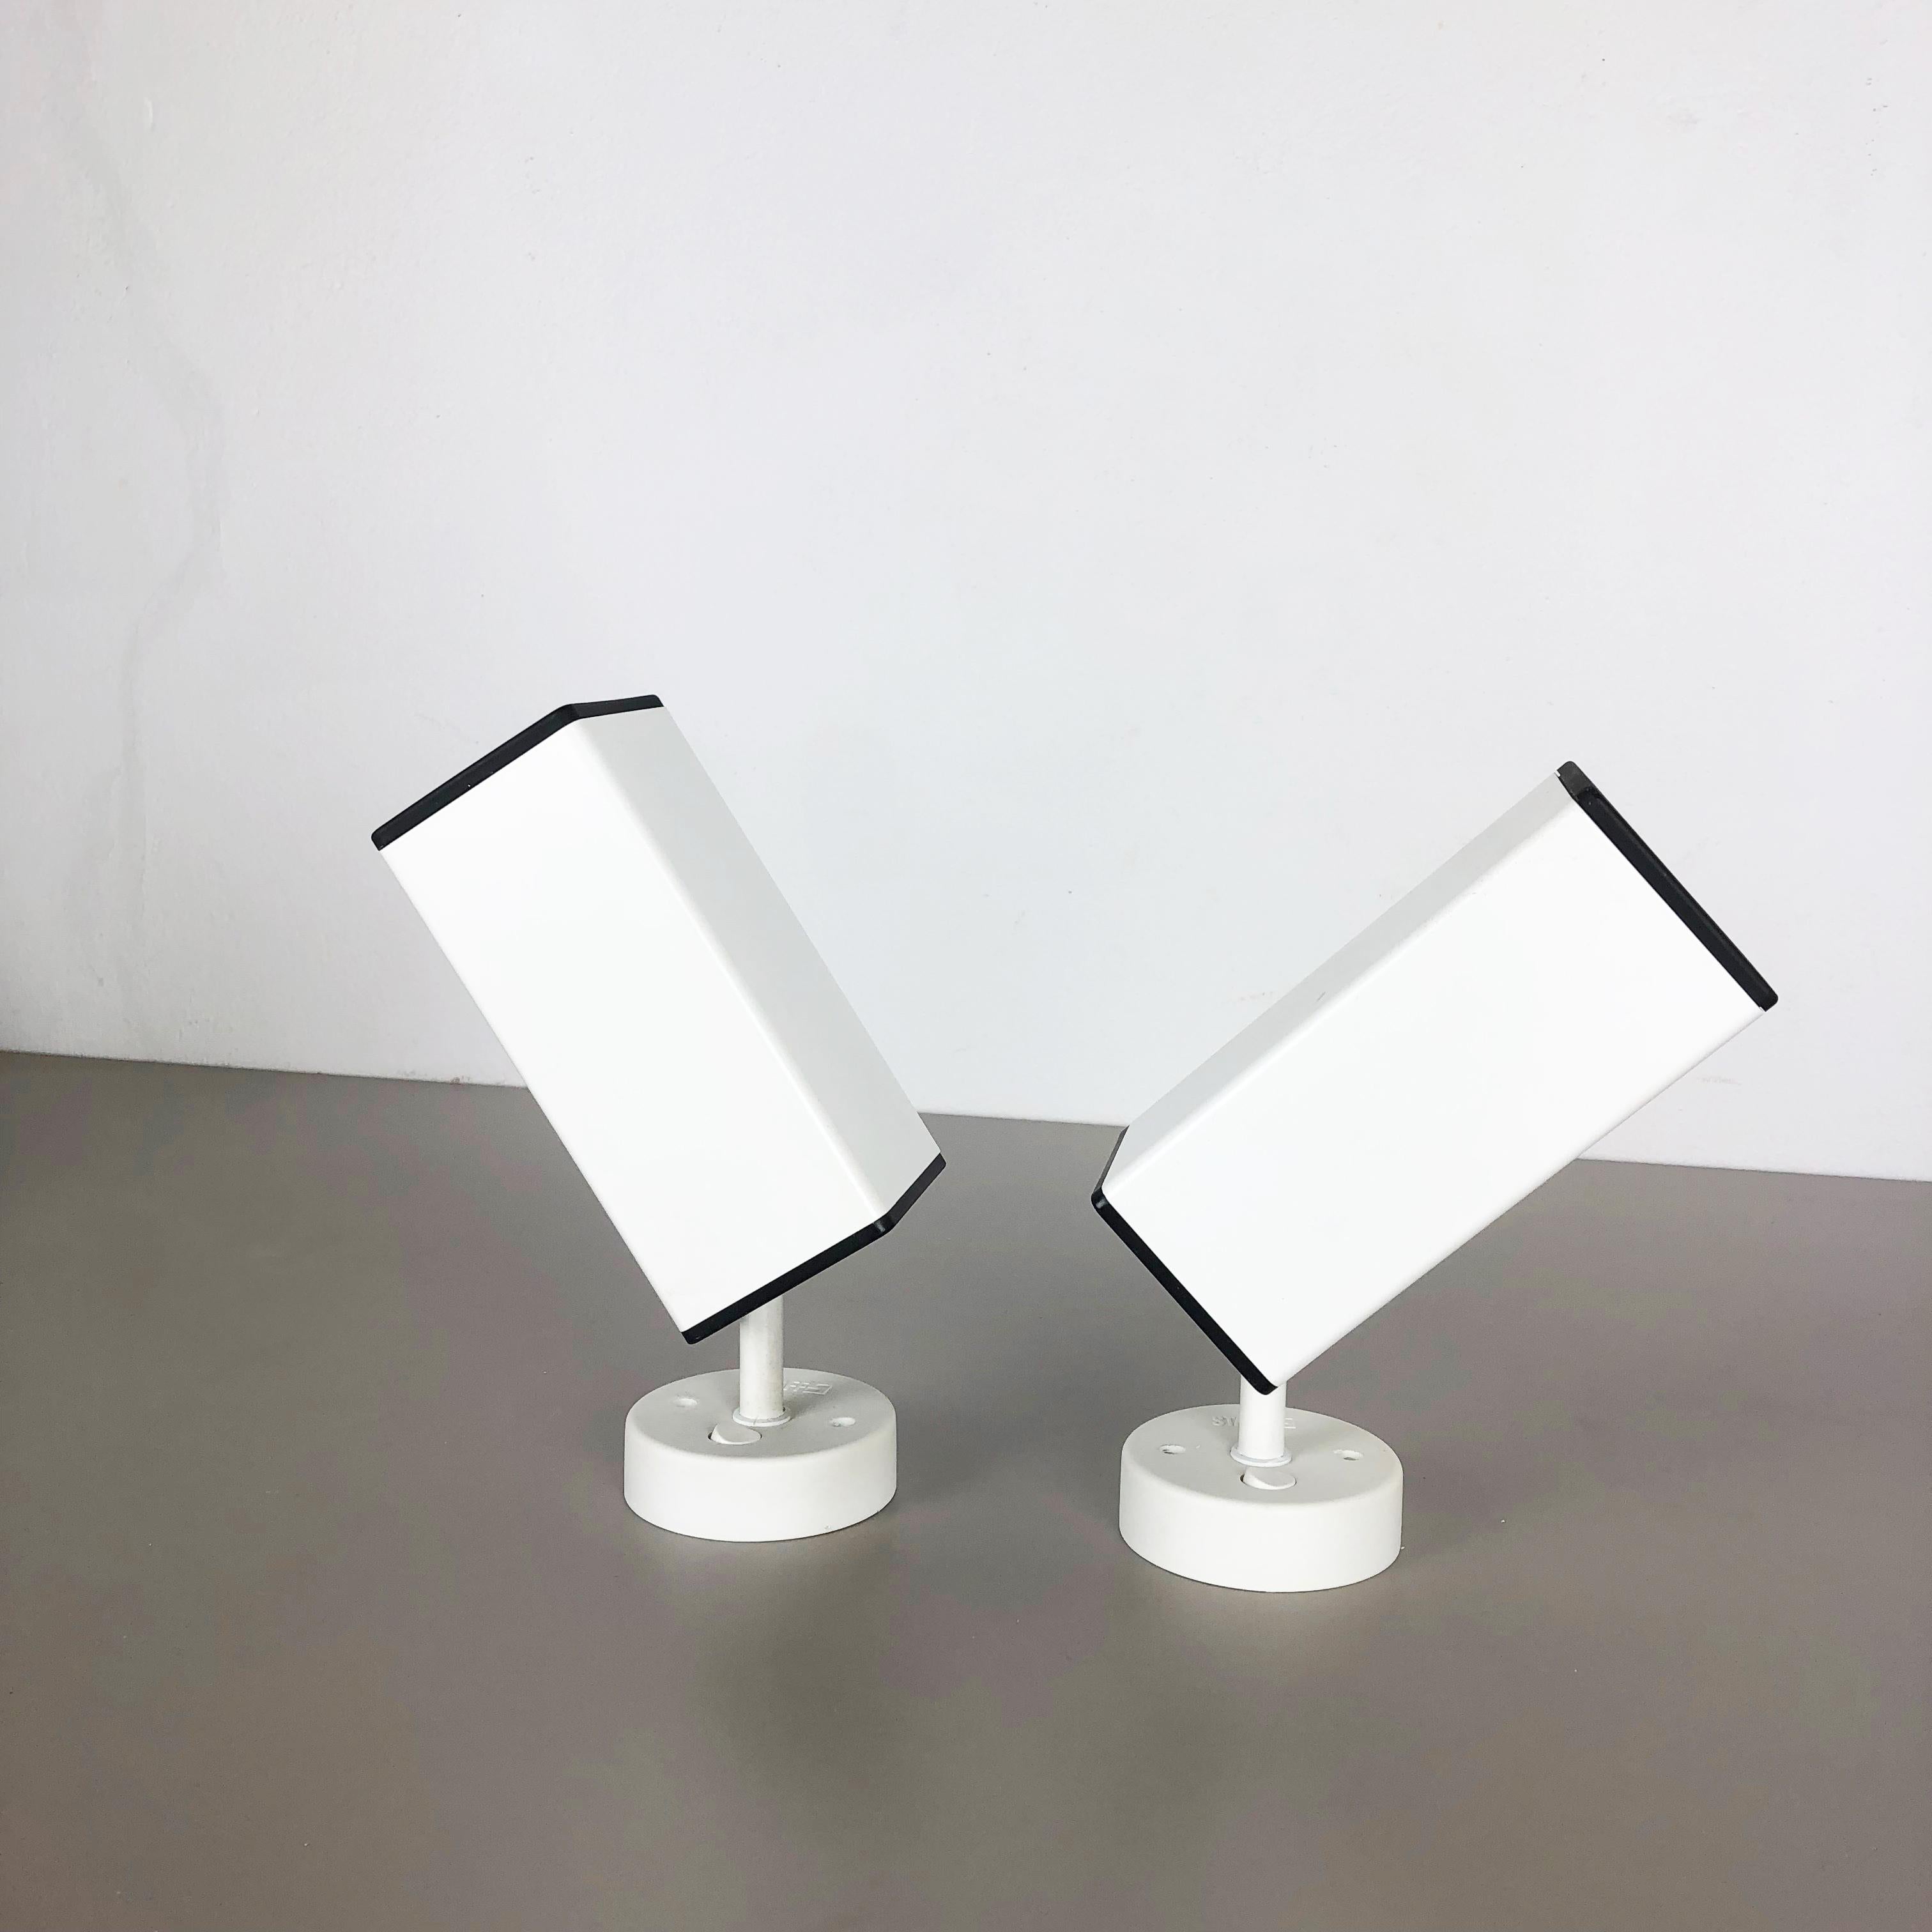 Set of 2 staff wall light white spot.

8 identical light are available, please get in contact if you want more than one set of 2.



Origin:

Made in Germany


Producer:

Staff lights, lemgo



Decade: 1970s



Rare 1970s Staff